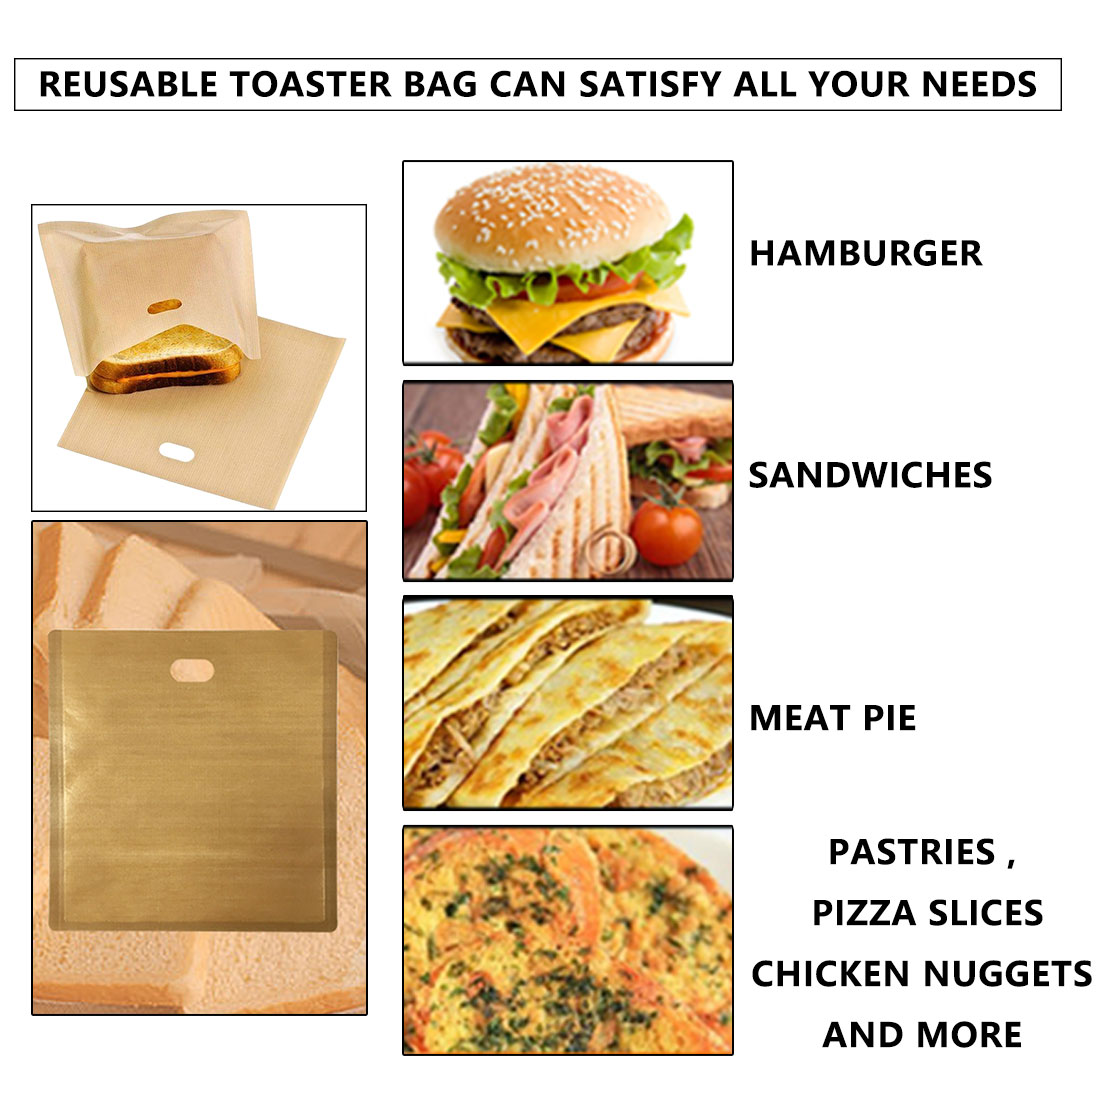 Details about   5PCS Reusable Non Stick Bread Sandwich Bags Toast Microwave Heating Pastry Tools 